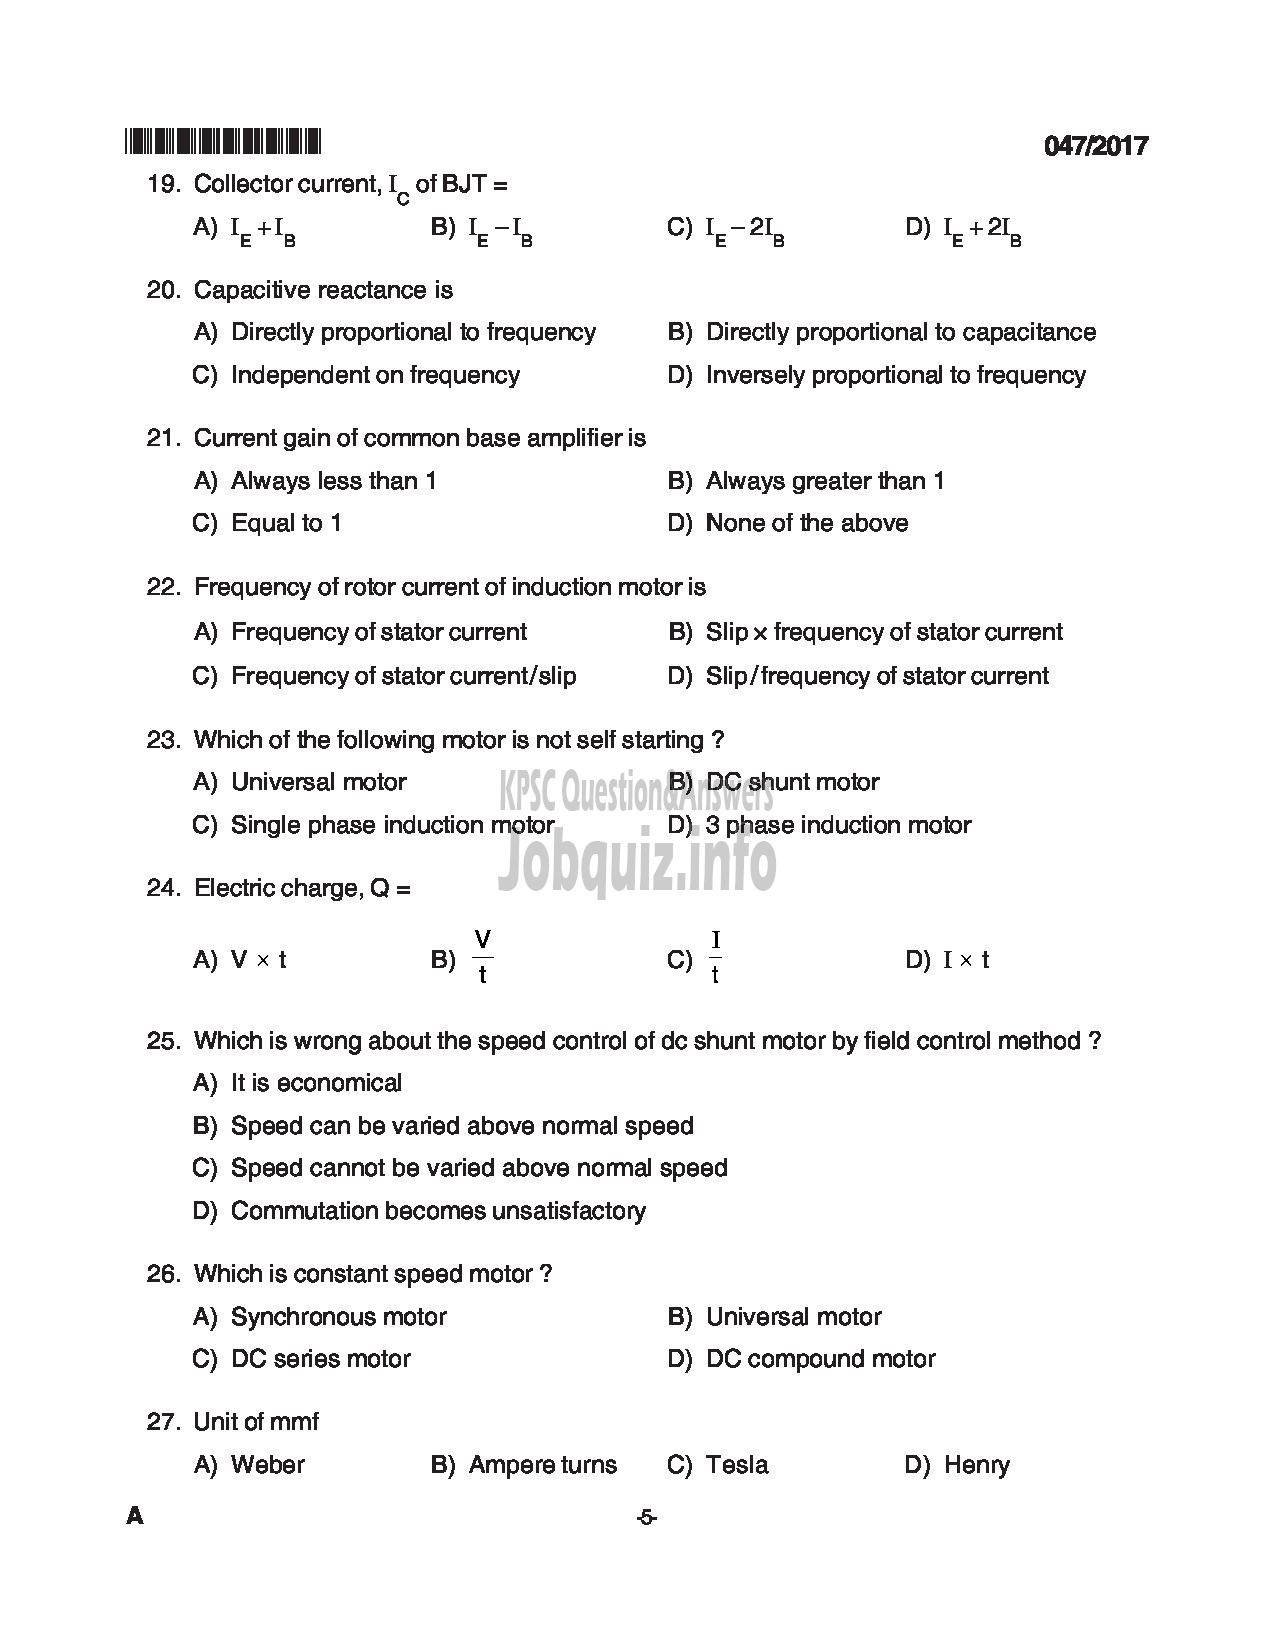 Kerala PSC Question Paper - ELECTRICIAN HEALTH SERVICES MEDICAL EDUCATION SERVICE ARCHAEOLOGY QUESTION PAPER-5